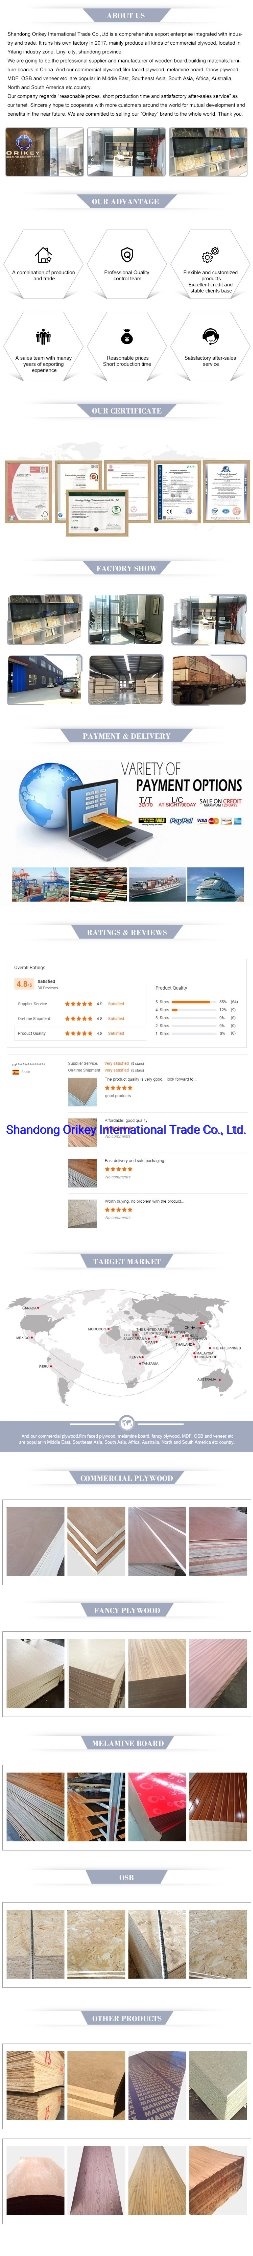 3A 3A+2A 2A Grade Fancy Plywood for Furniture From Shandong China